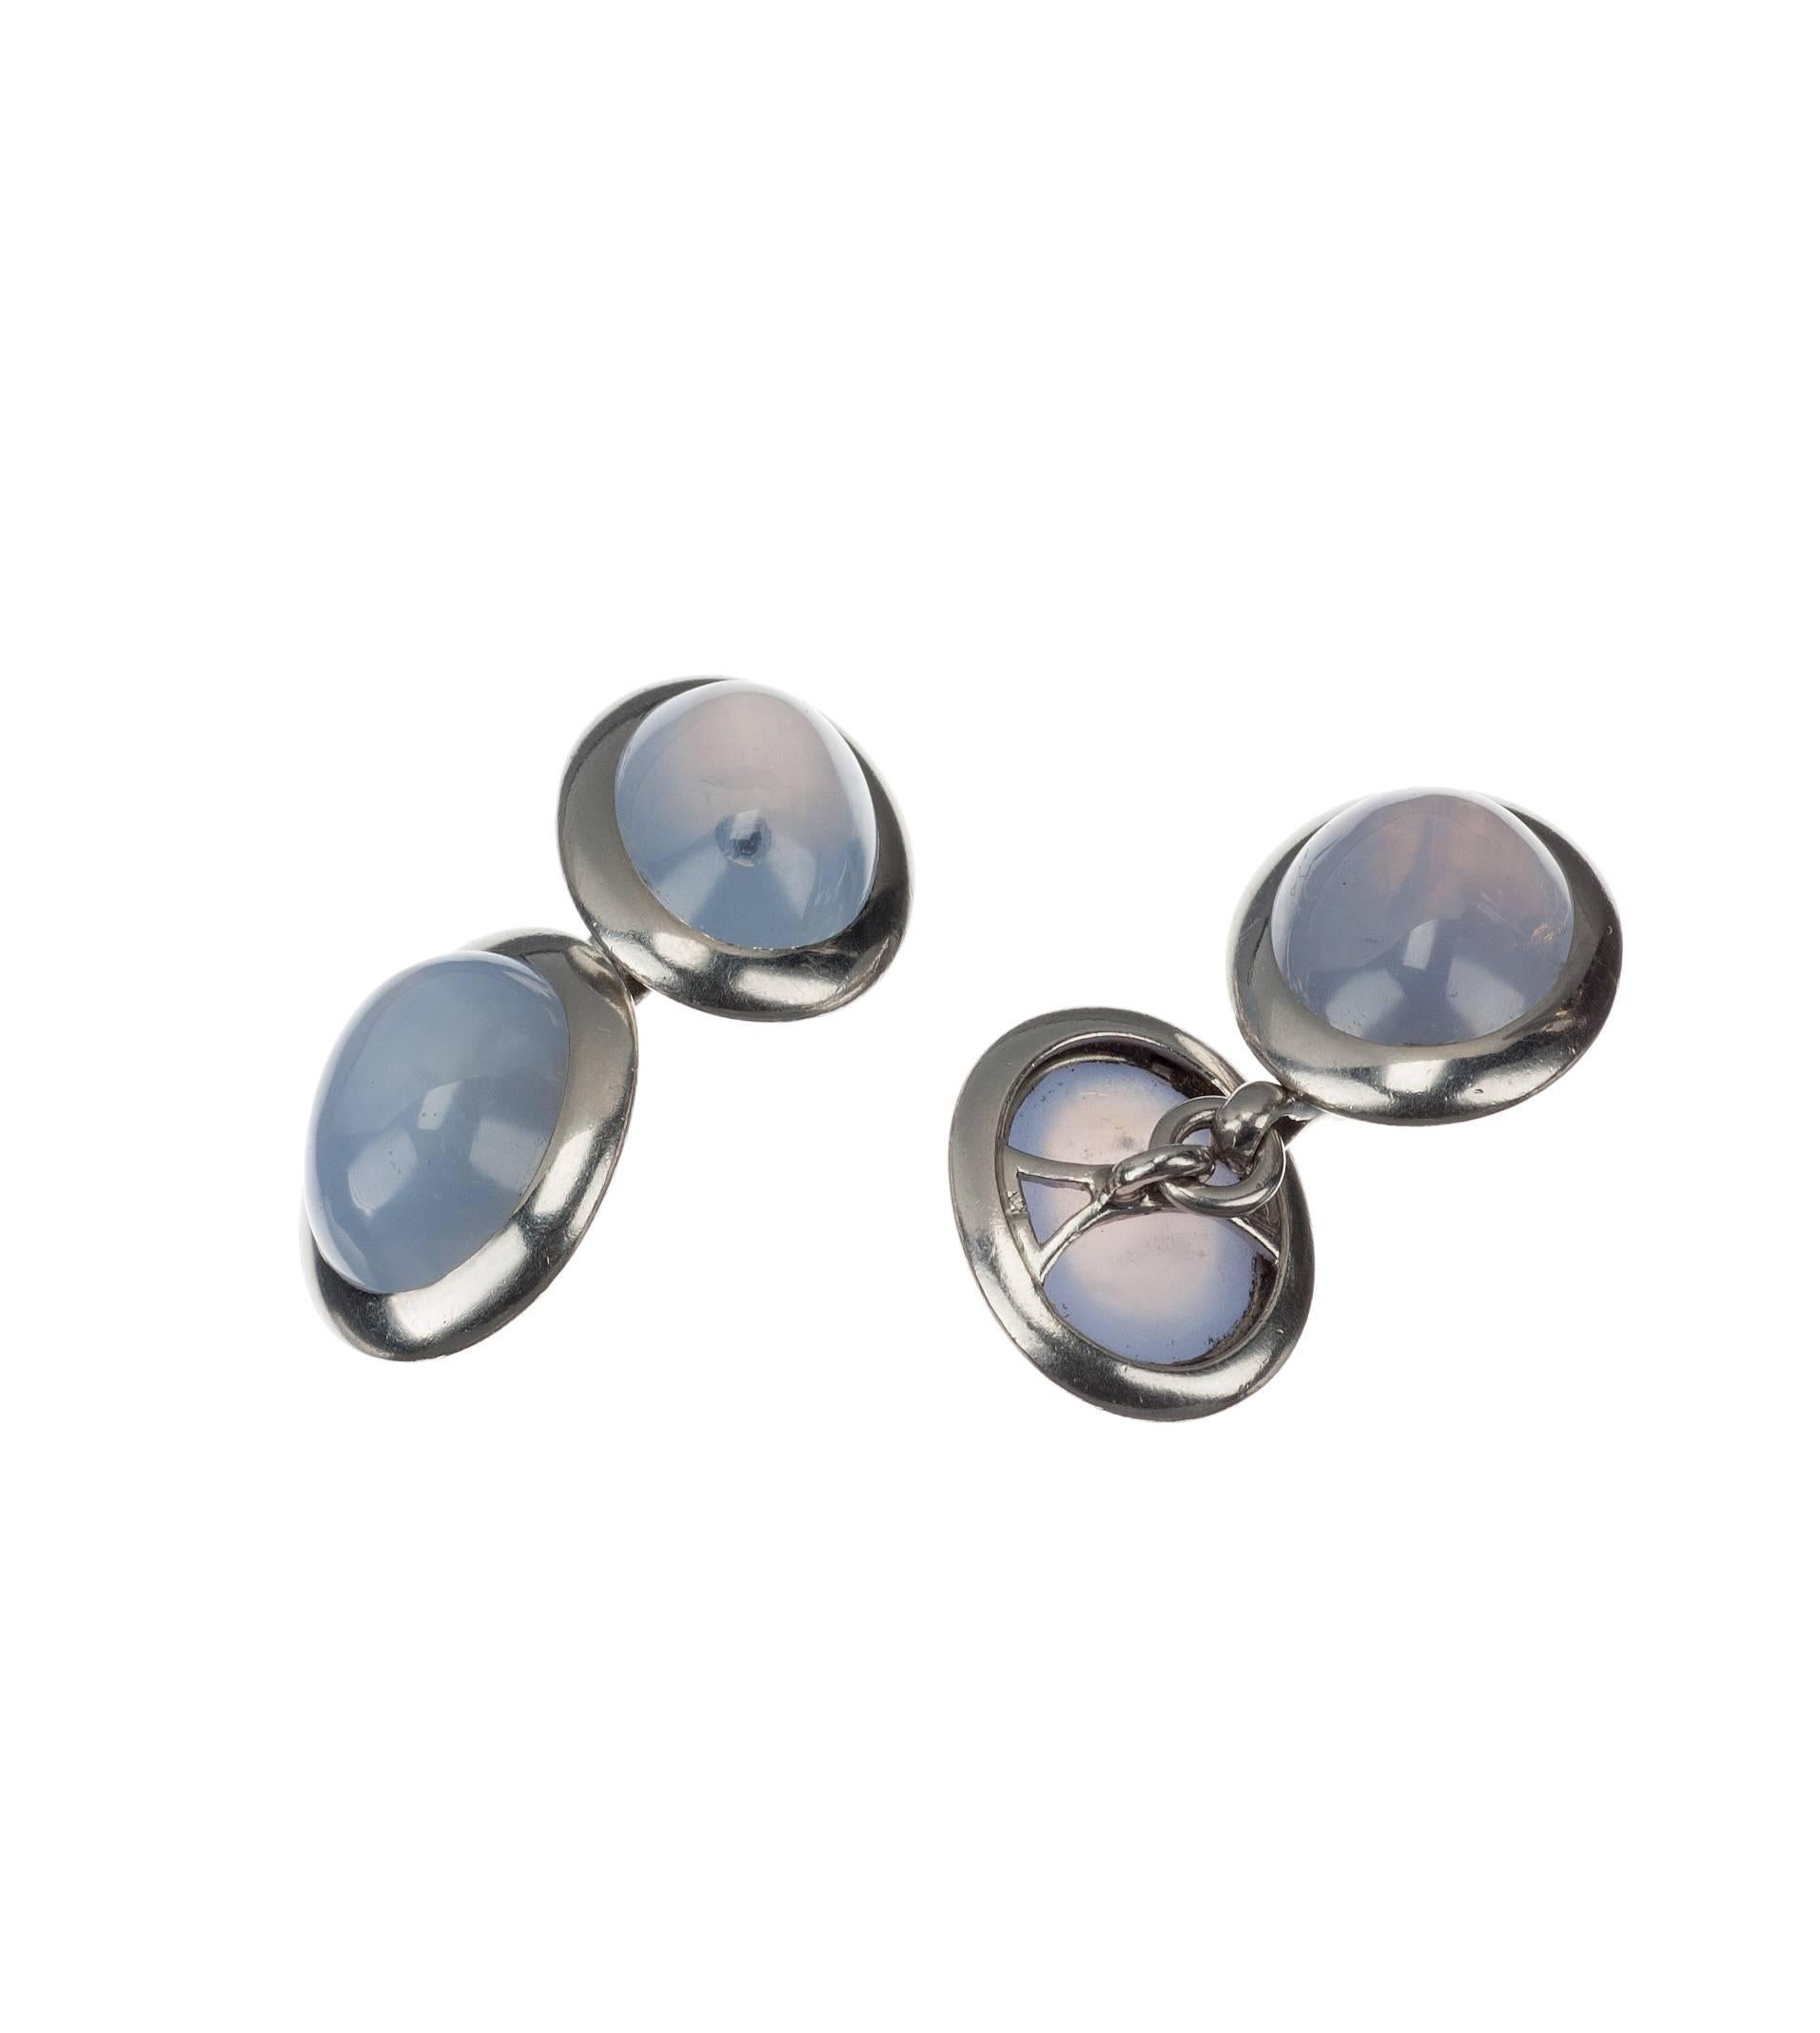 Four beautifully matched, natural oval star sapphires are set in platinum bezels, creating an understated, elegant pair of cuff links. 13mm x 15mm bezels.